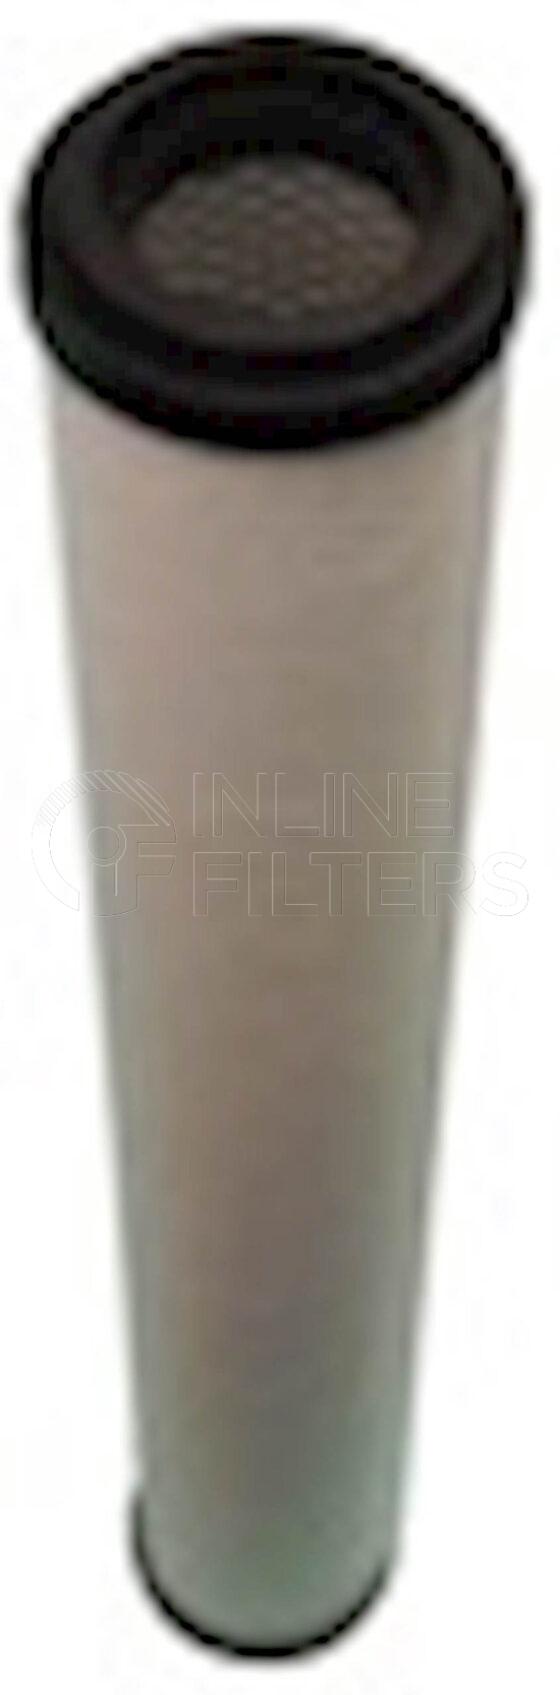 Inline FA18374. Air Filter Product – Compressed Air – Cartridge Product Air filter product